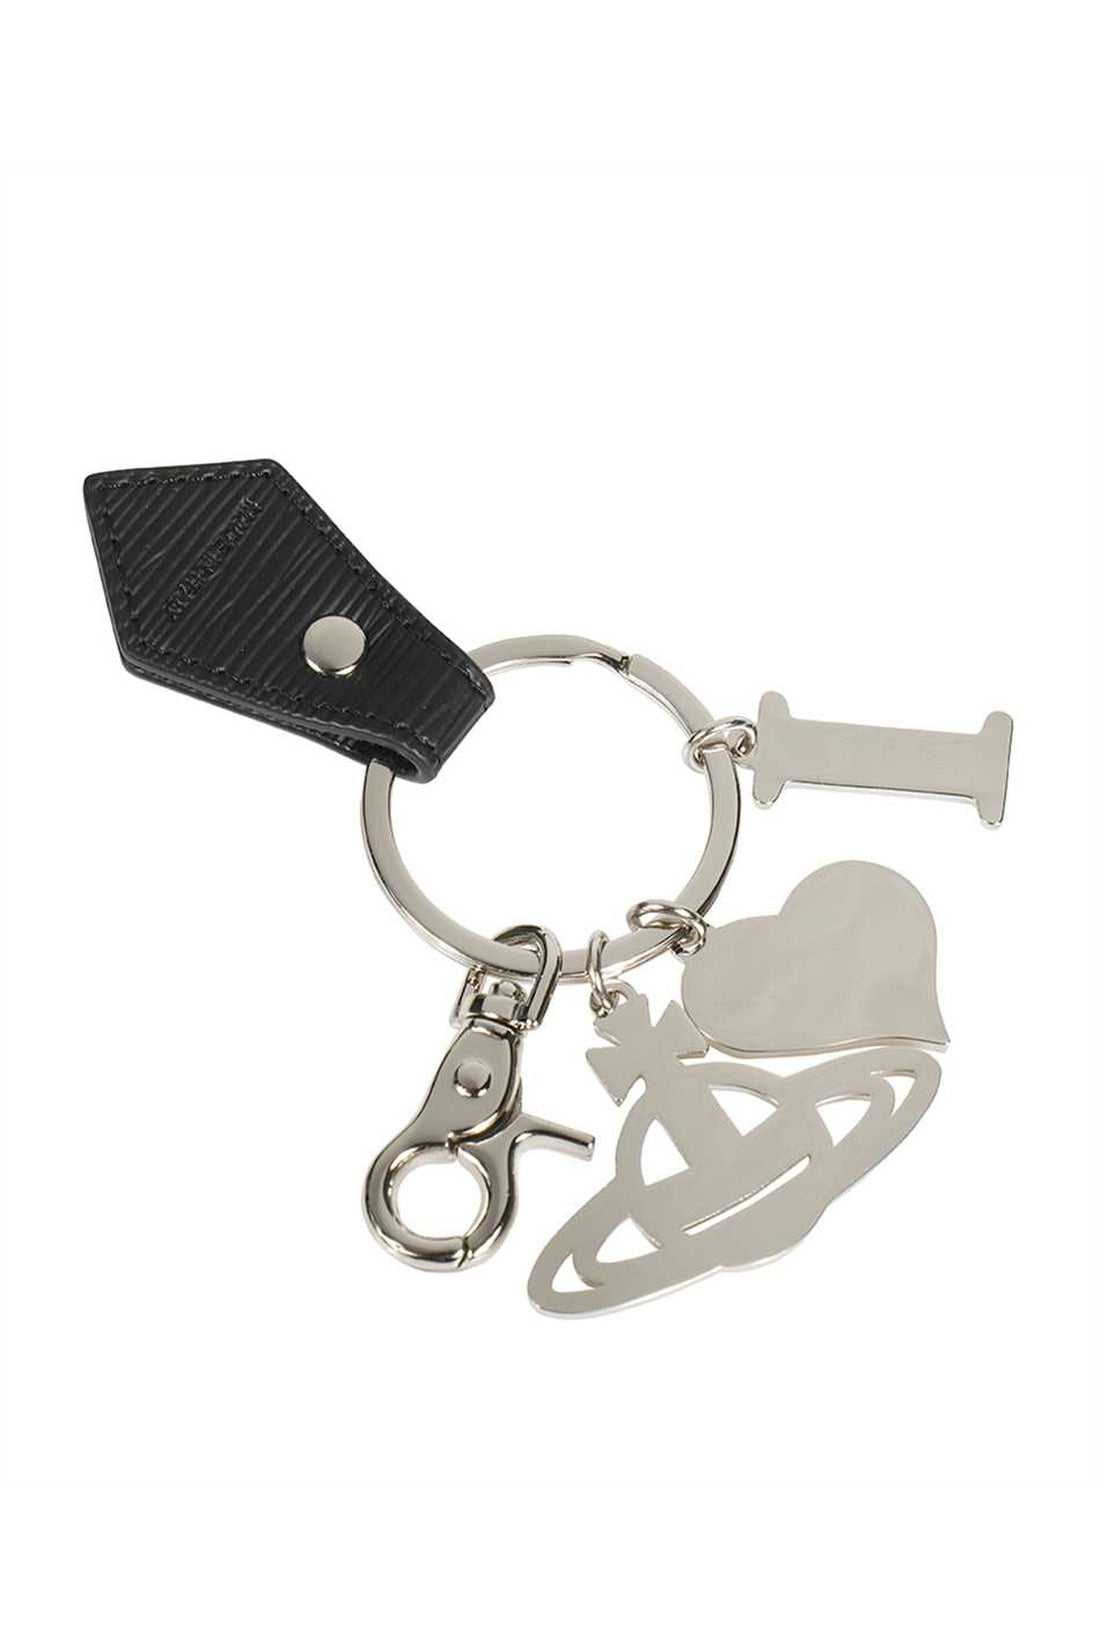 Vivienne Westwood-OUTLET-SALE-Key ring with decorative charms-ARCHIVIST